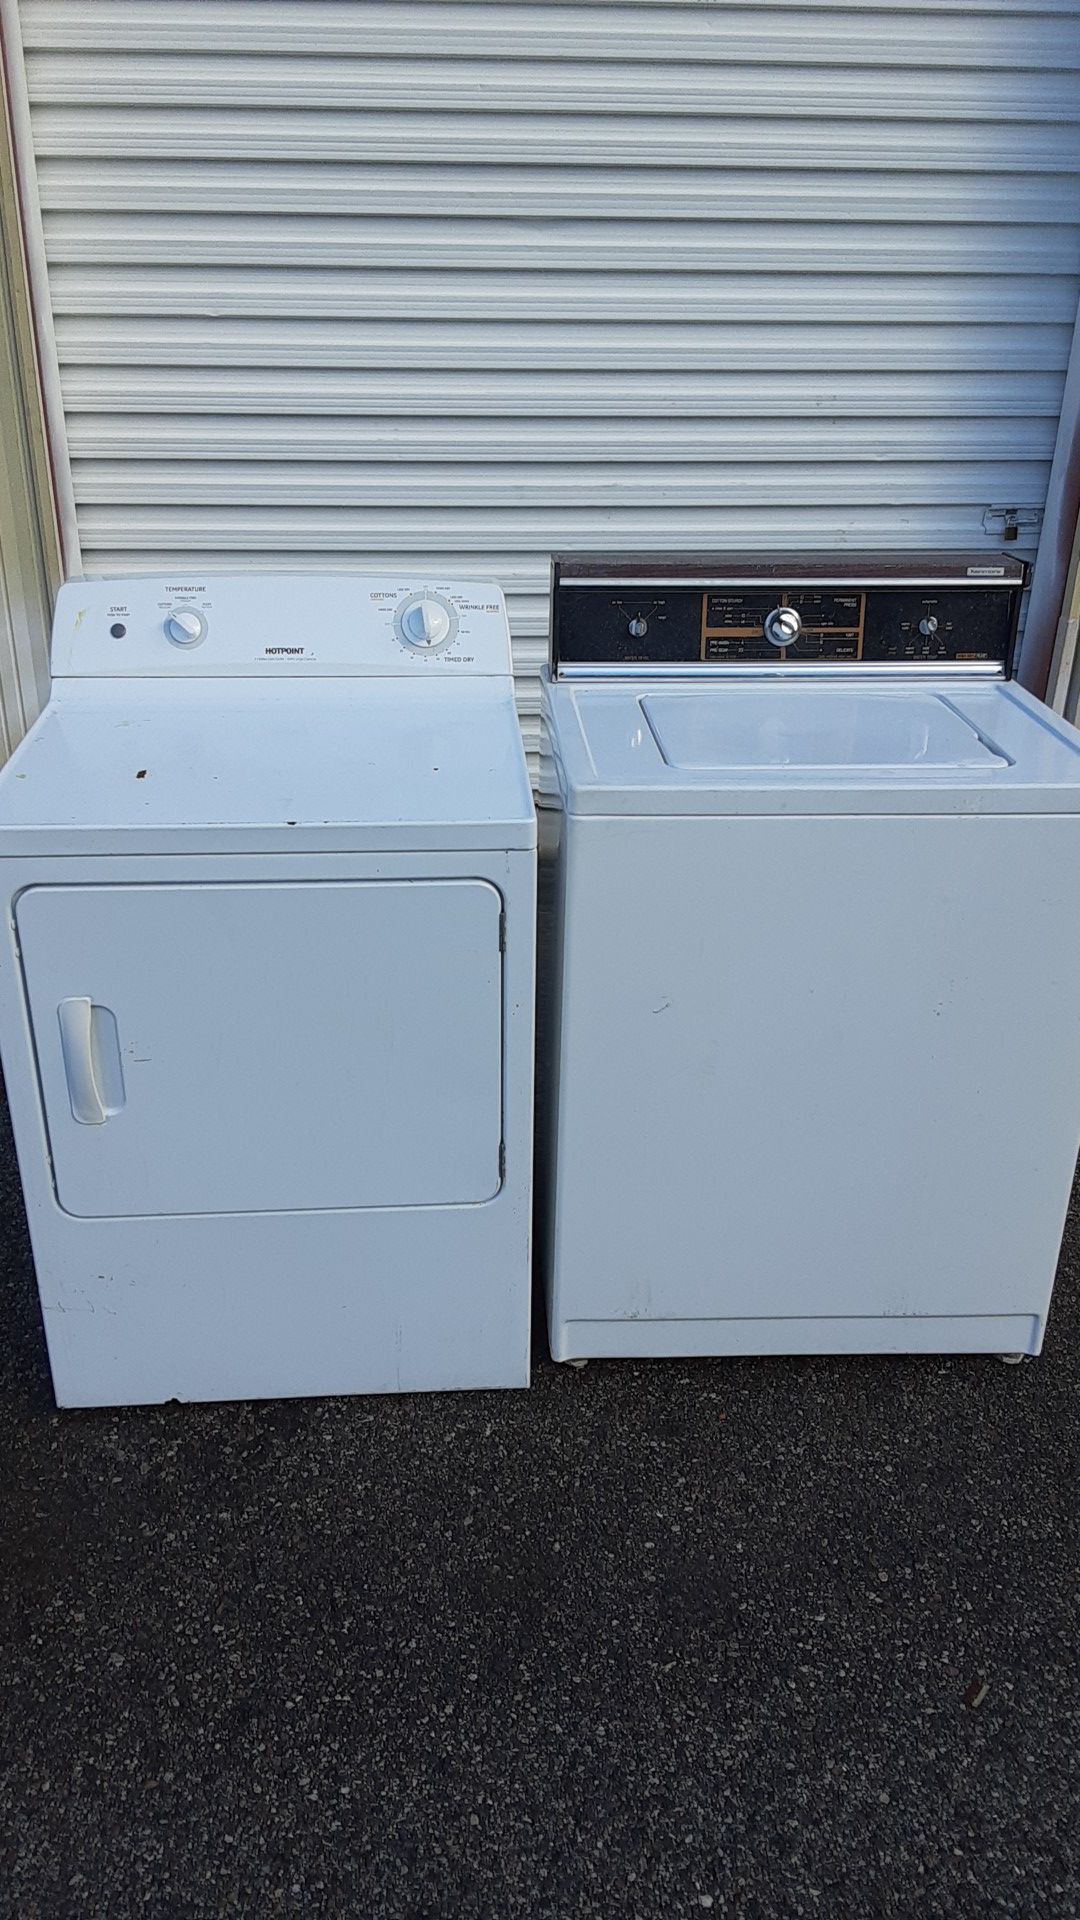 Kenmore large-capacity top load washer Hotpoint large-capacity front-load dryer good working order no issues